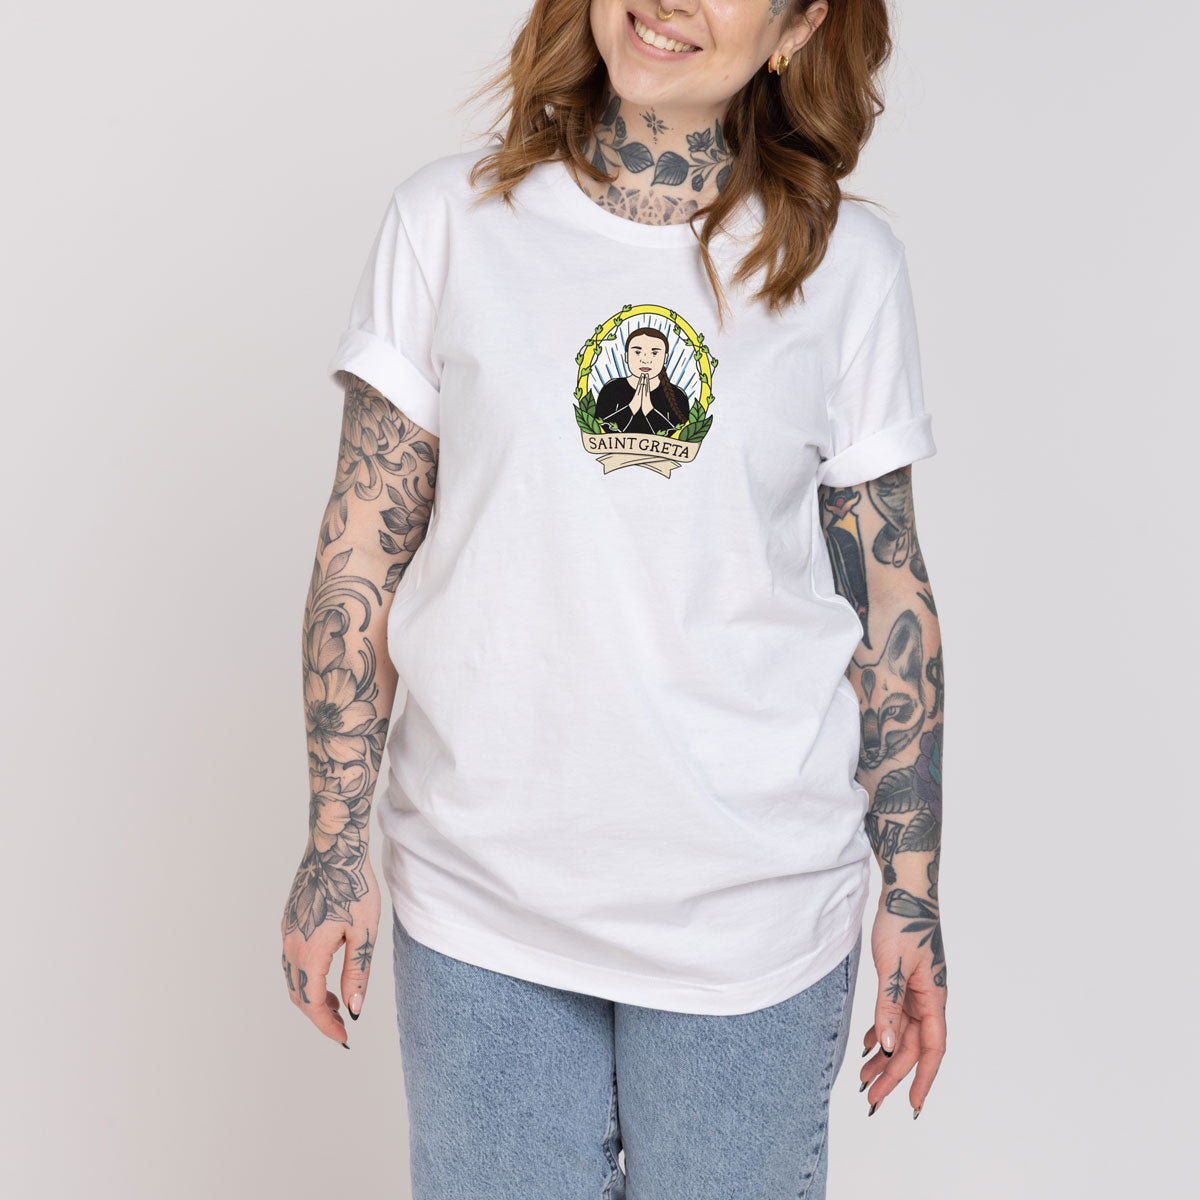 vegan outfitters product